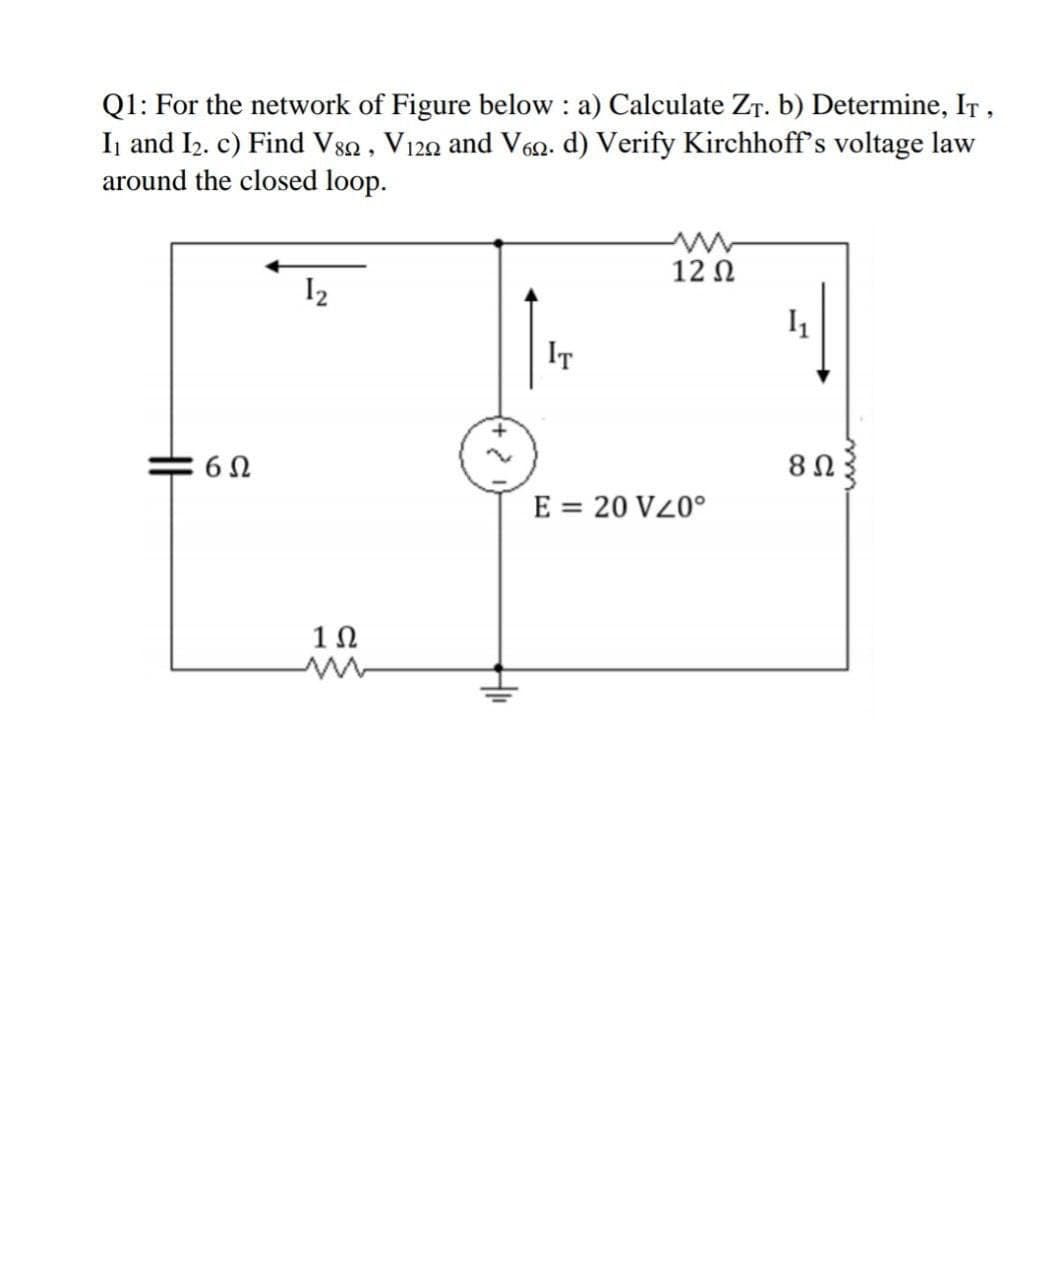 Q1: For the network of Figure below : a) Calculate ZT. b) Determine, IT,
Ij and I2. c) Find Vsa, V120 and V60. d) Verify Kirchhoff's voltage law
around the closed loop.
12 N
I2
IT
E = 20 VZ0°
